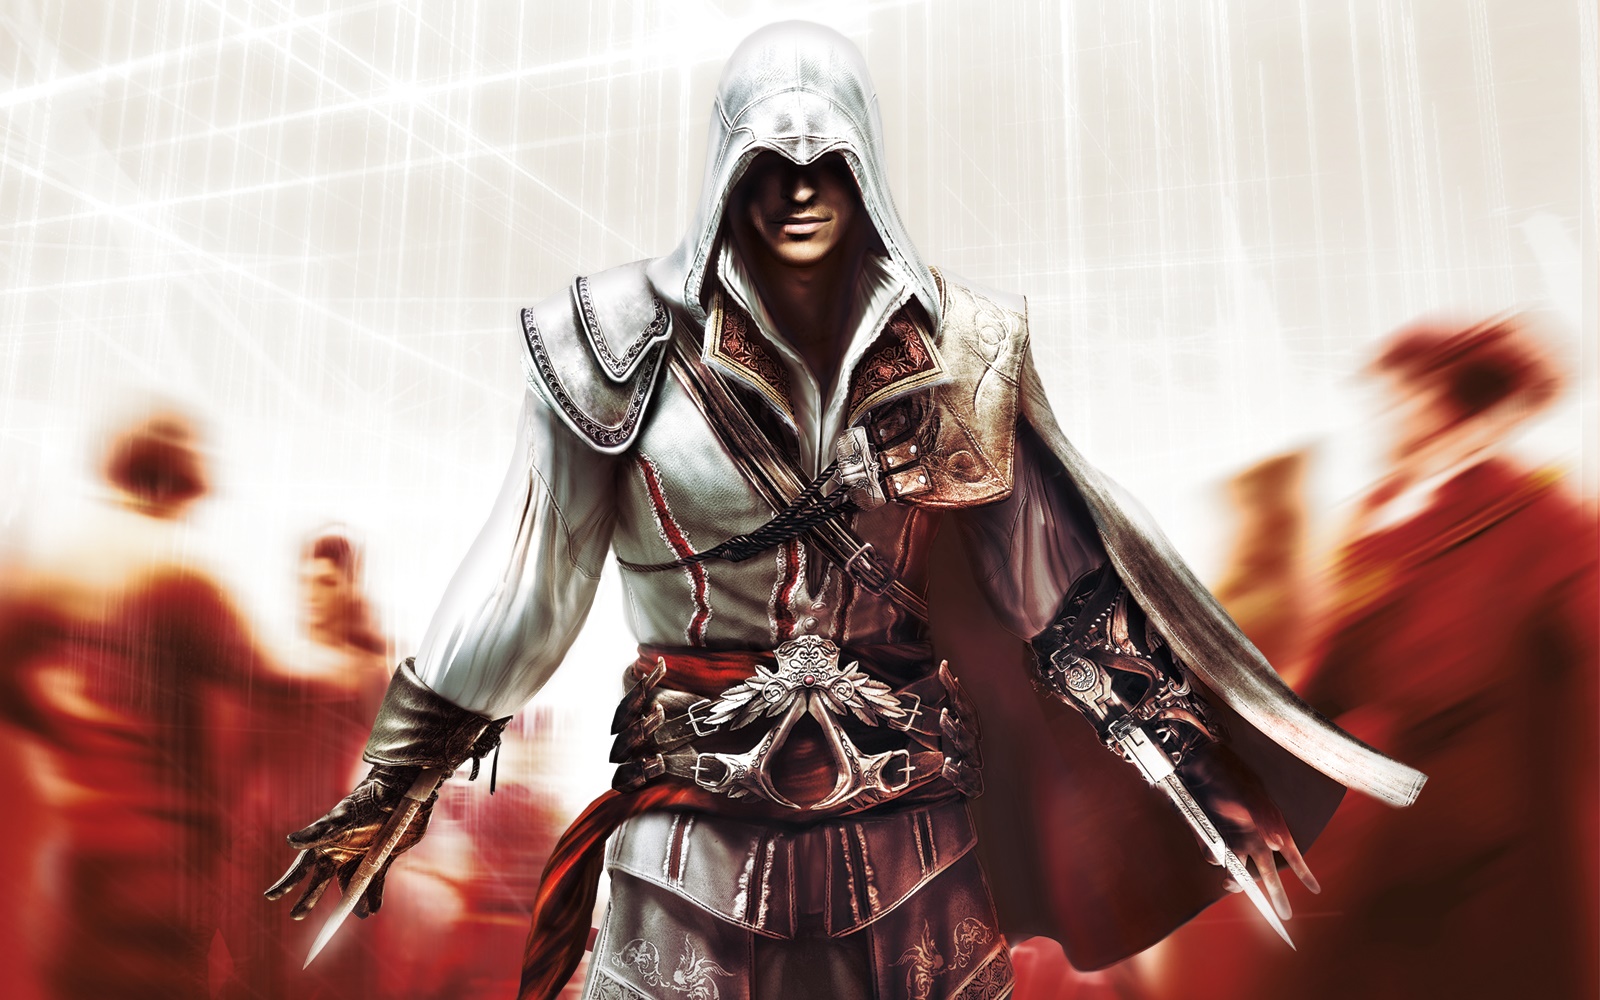 Assassin games 2. Assassin's Creed Эцио. Assassin`s Creed 2. Ассасин Крид 2 испанец. Ассасин Крид 2 Эцио Аудиторе.